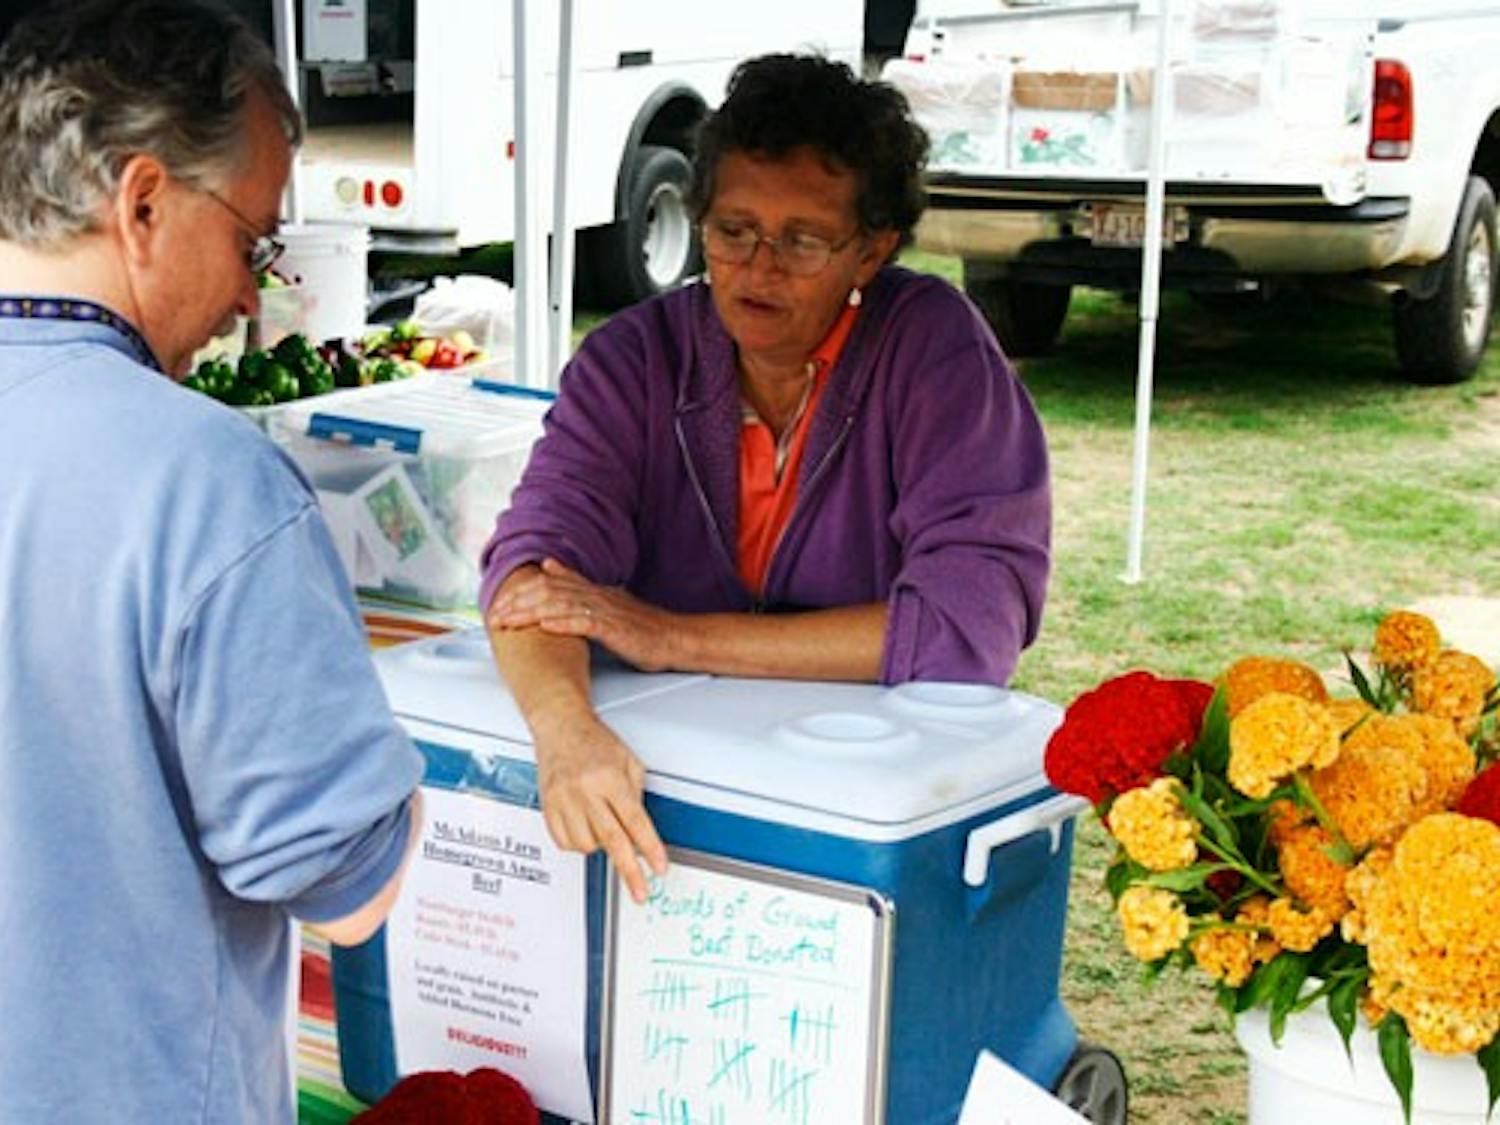 Karen McAdams of McAdams Farm explains how the donation system works at her booth. DTH/Tyler Benton